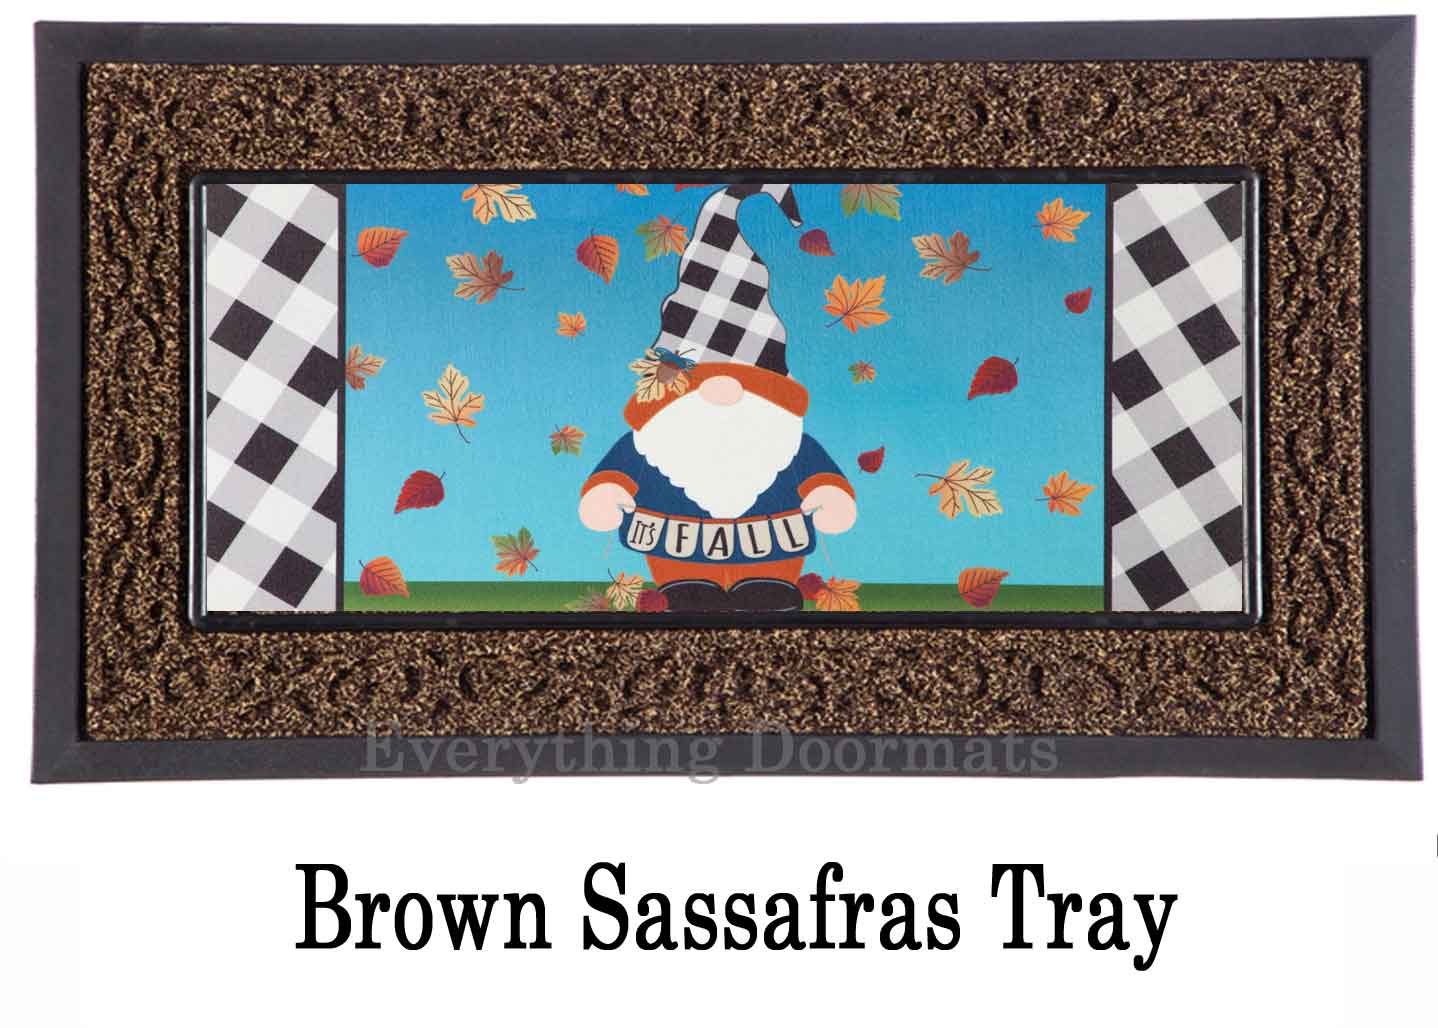 https://www.everythingdoormats.com/images/products/fall-gnome-sassafras-switch-insert-doormat-in-brown-insert-tray.jpg